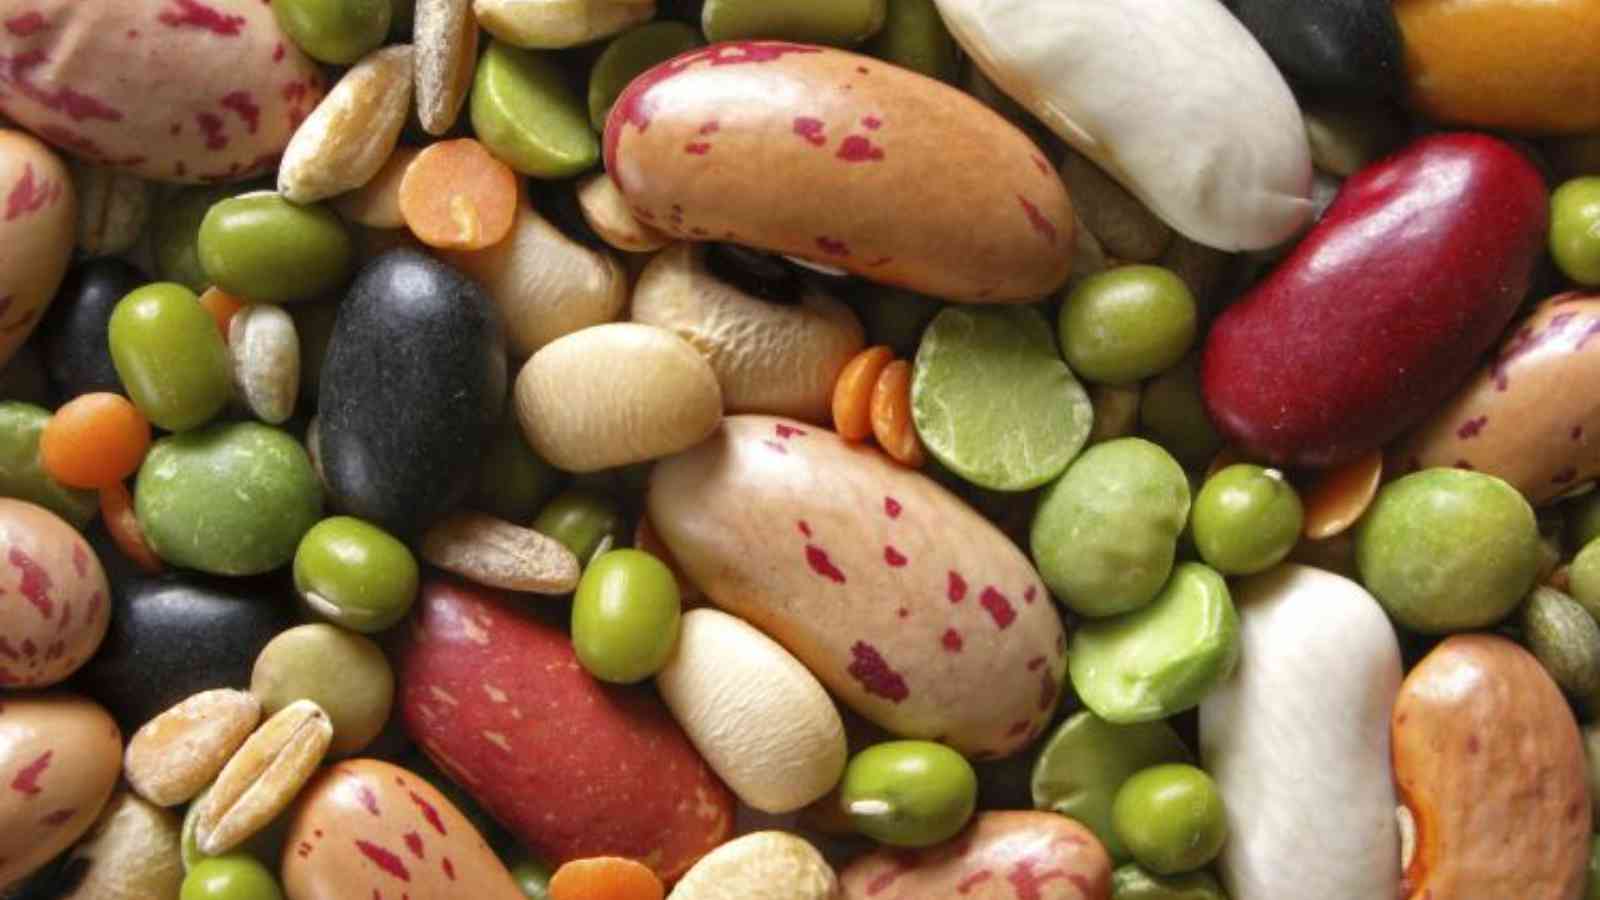 National Bean Day 2023: Date, History, Fun Facts about Beans